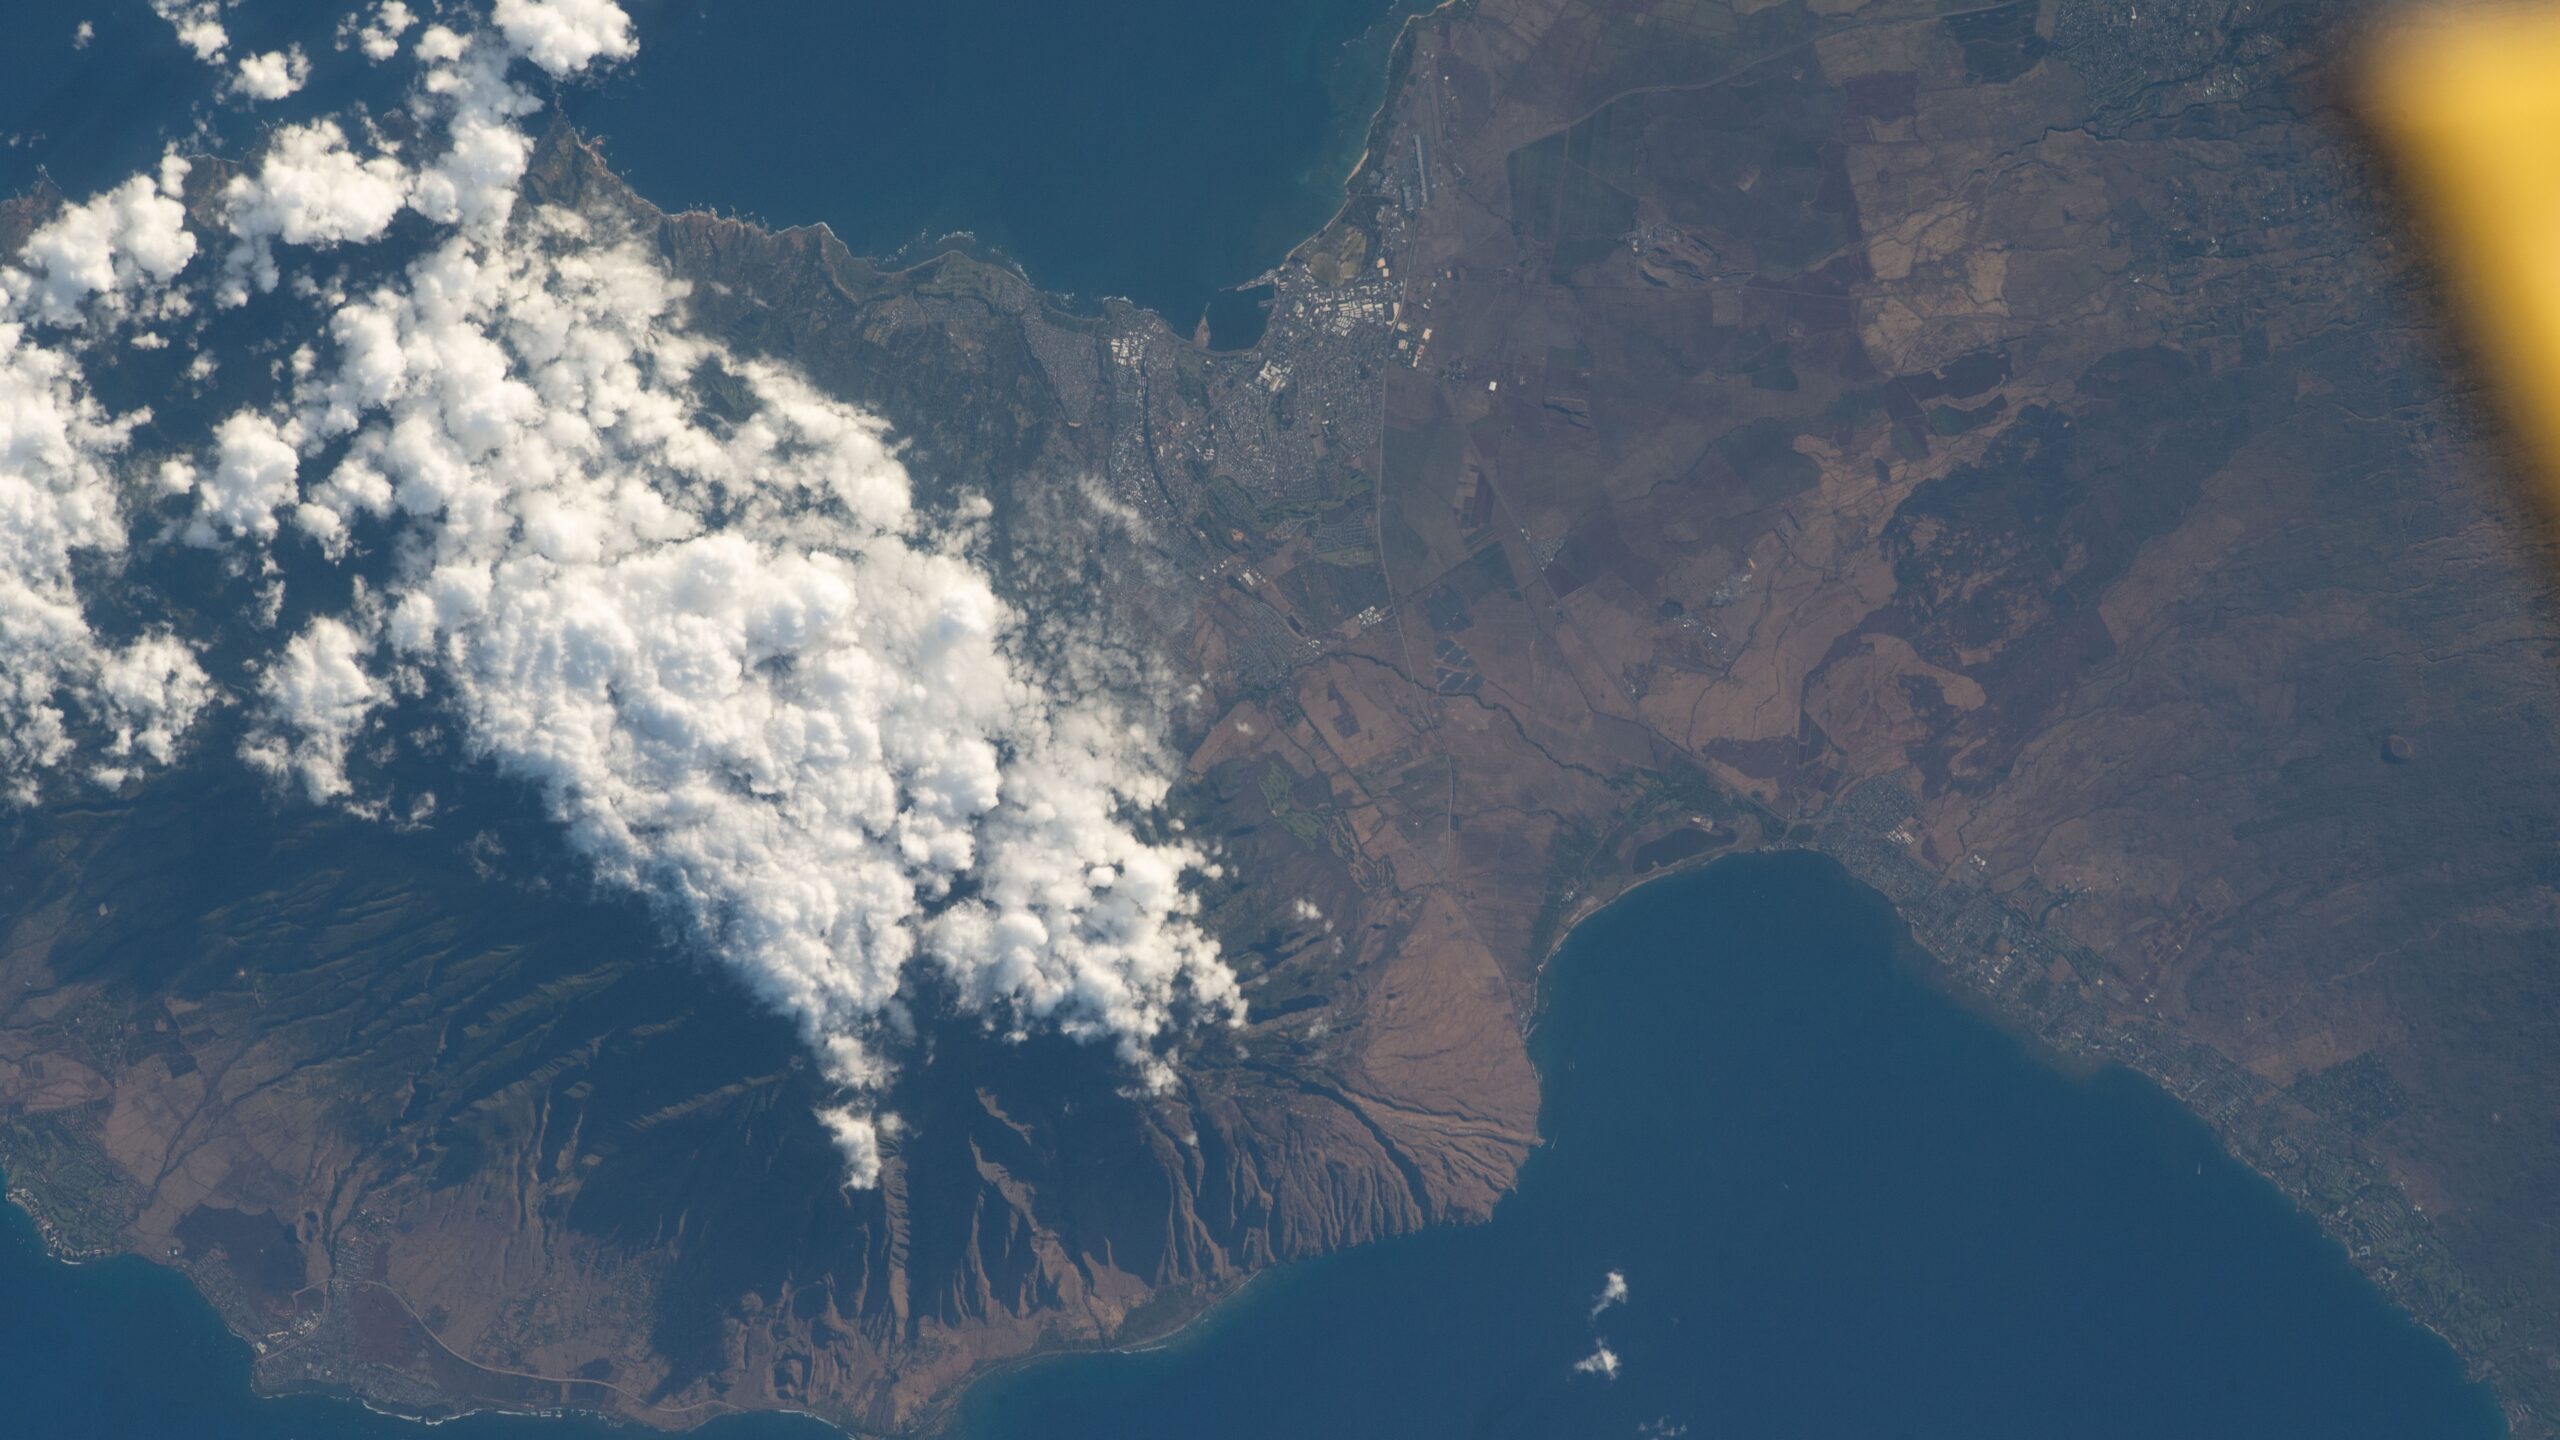 Deadly wildfires in Hawaii seen from International Space Station (photo)